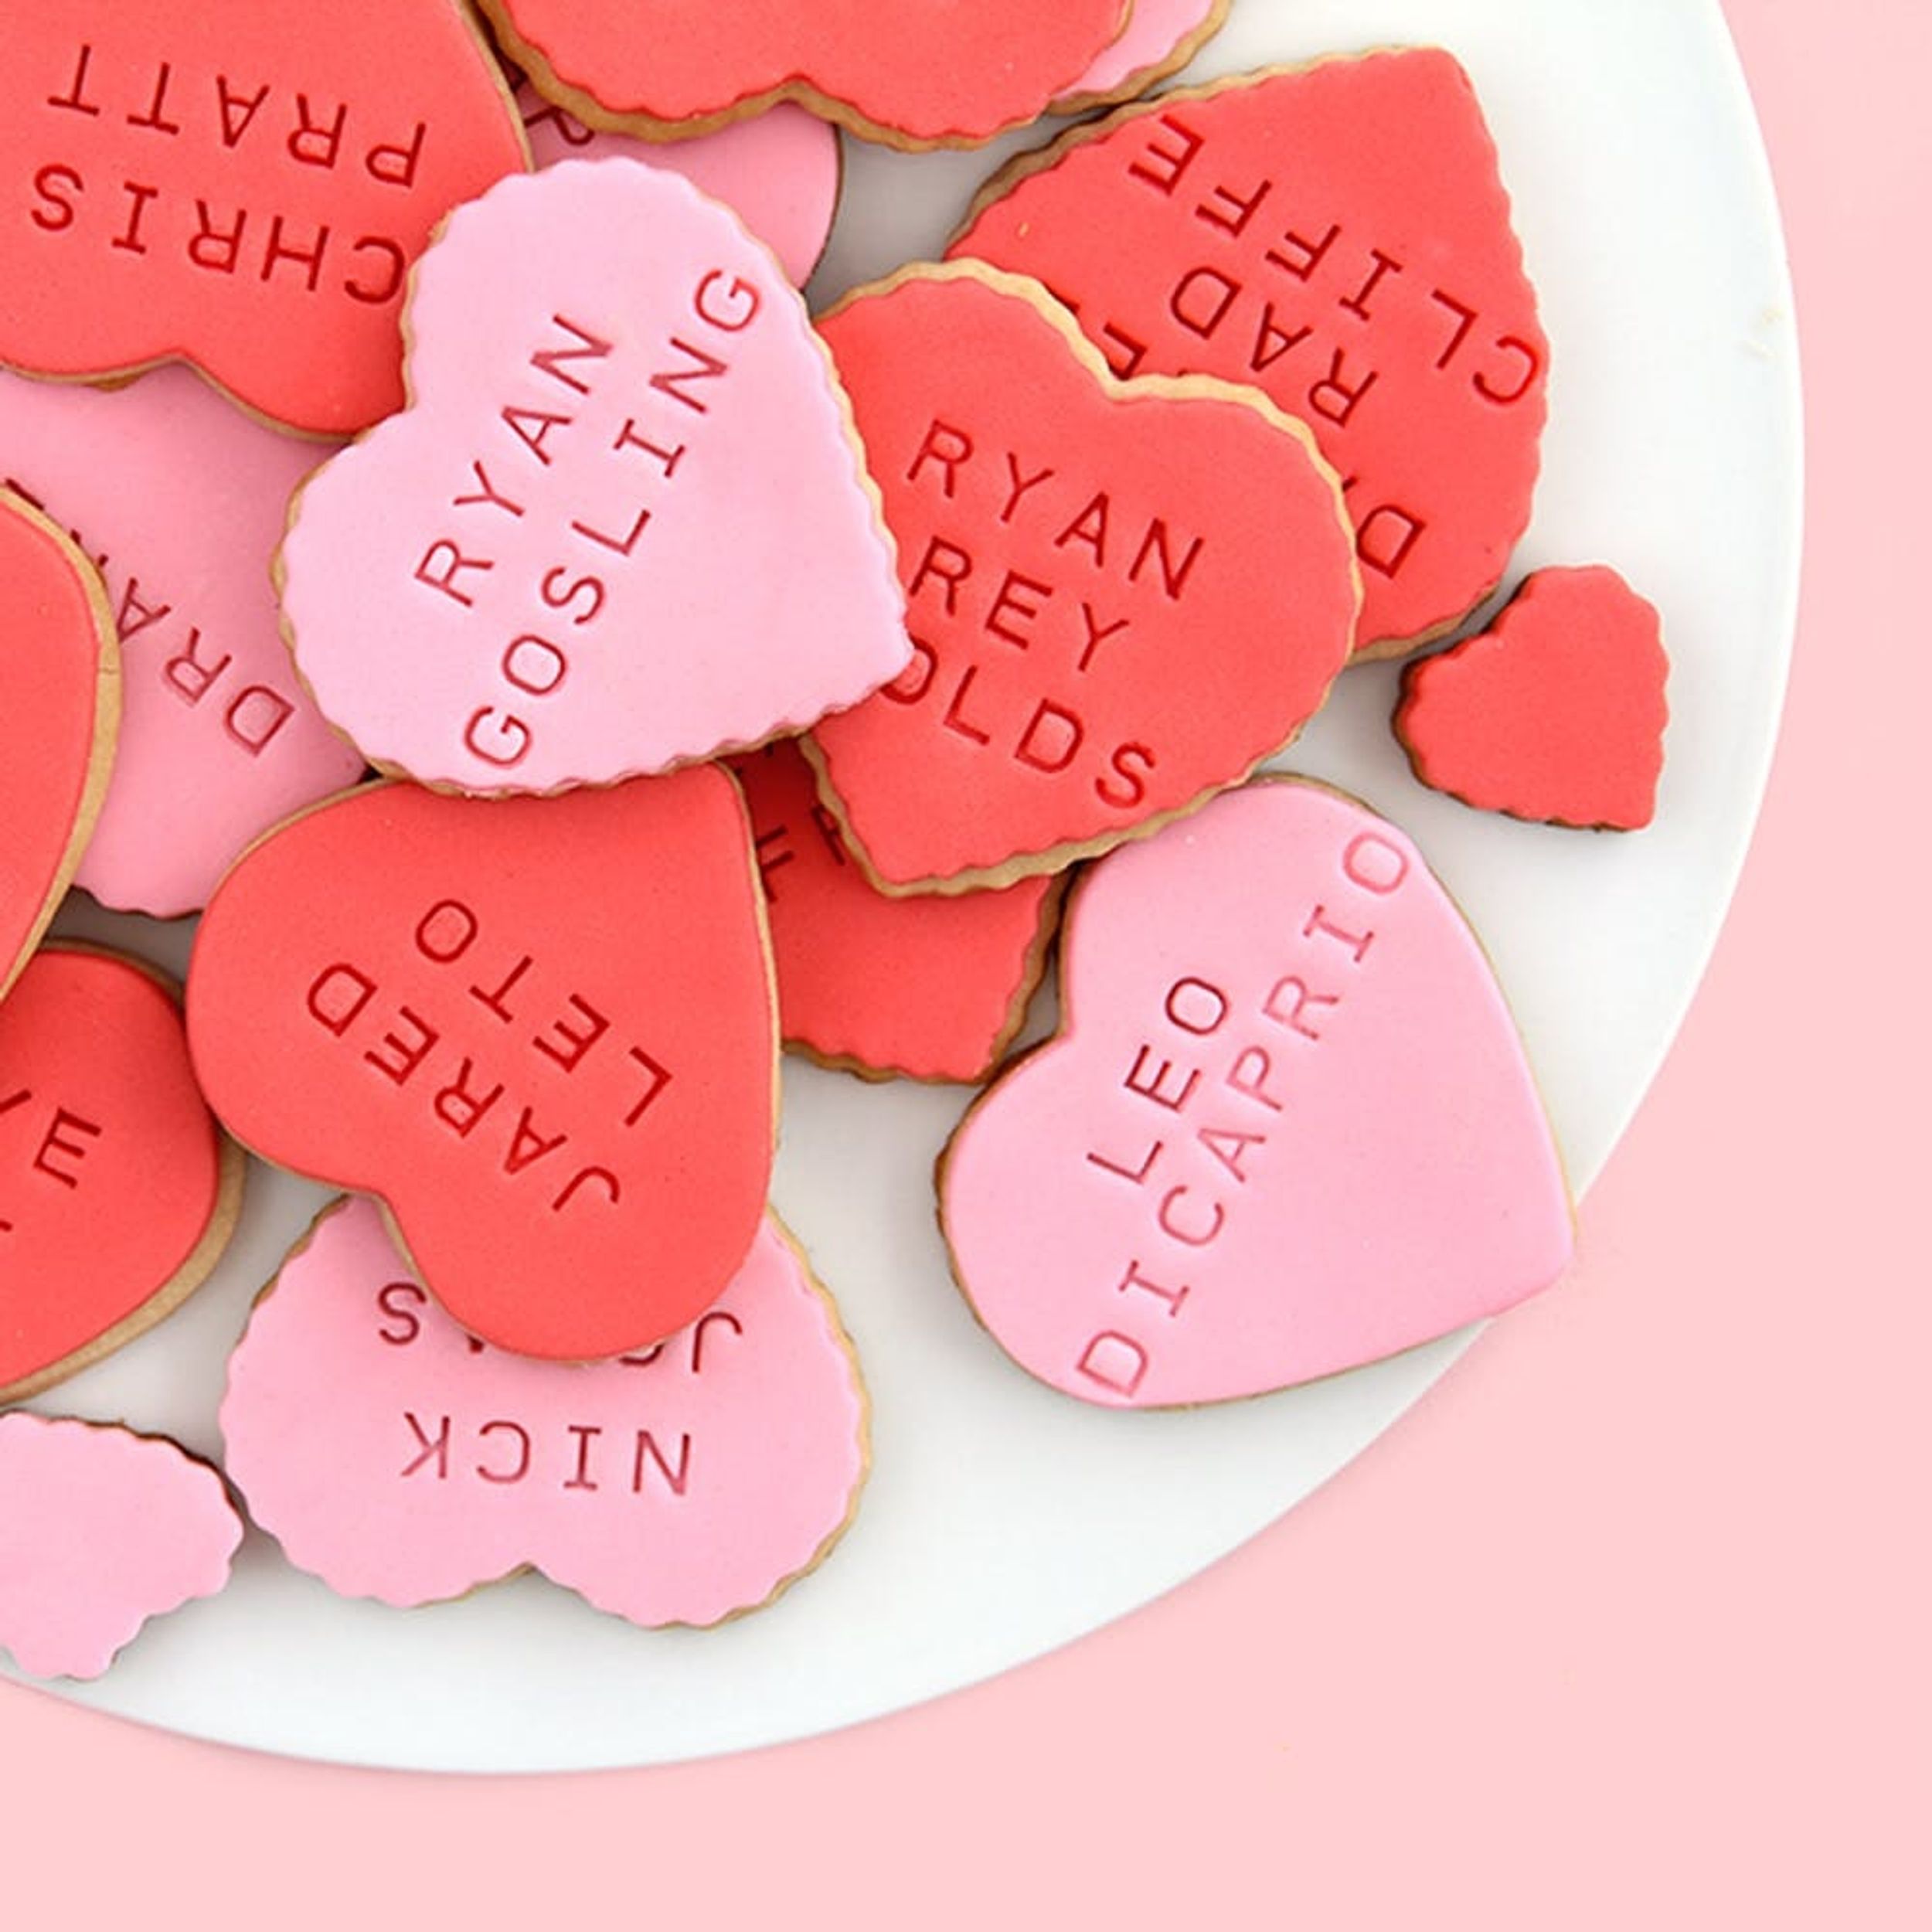 How to Make Celebrity Heartthrob Valentine’s Day Cookies